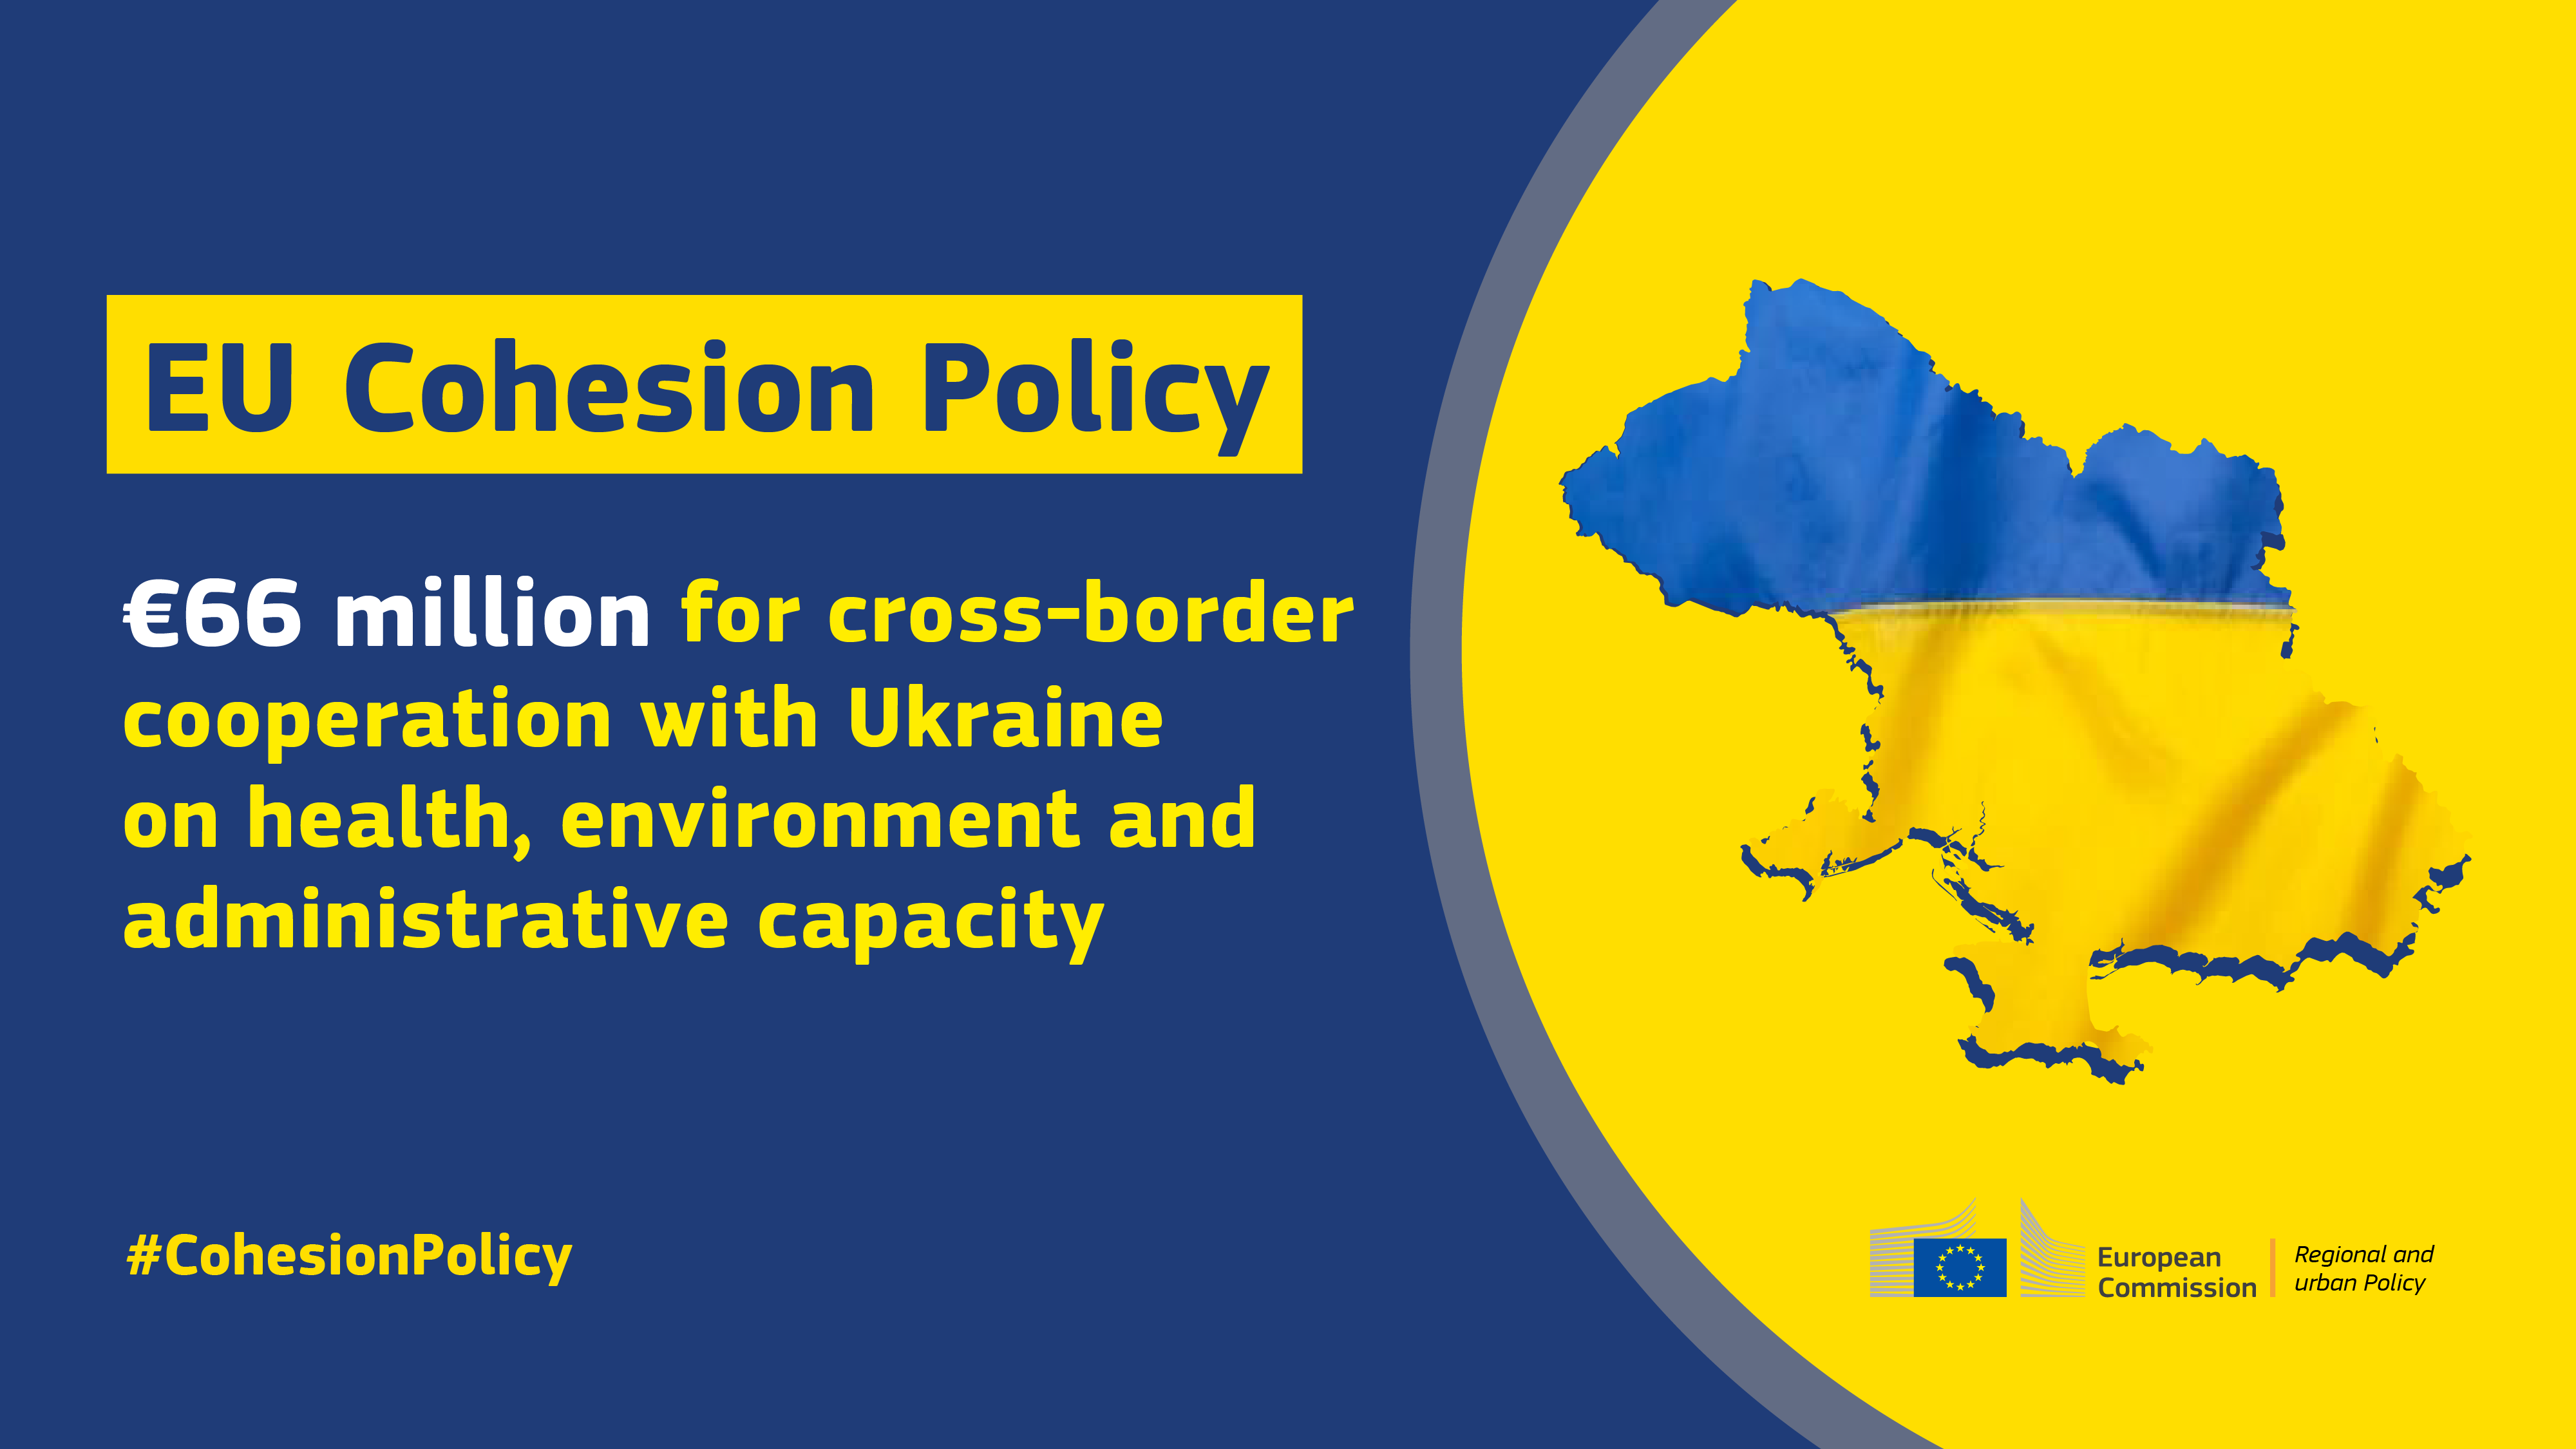 EU Cohesion Policy: over €66 million for cross-border cooperation with Ukraine on health, environment and administrative capacity